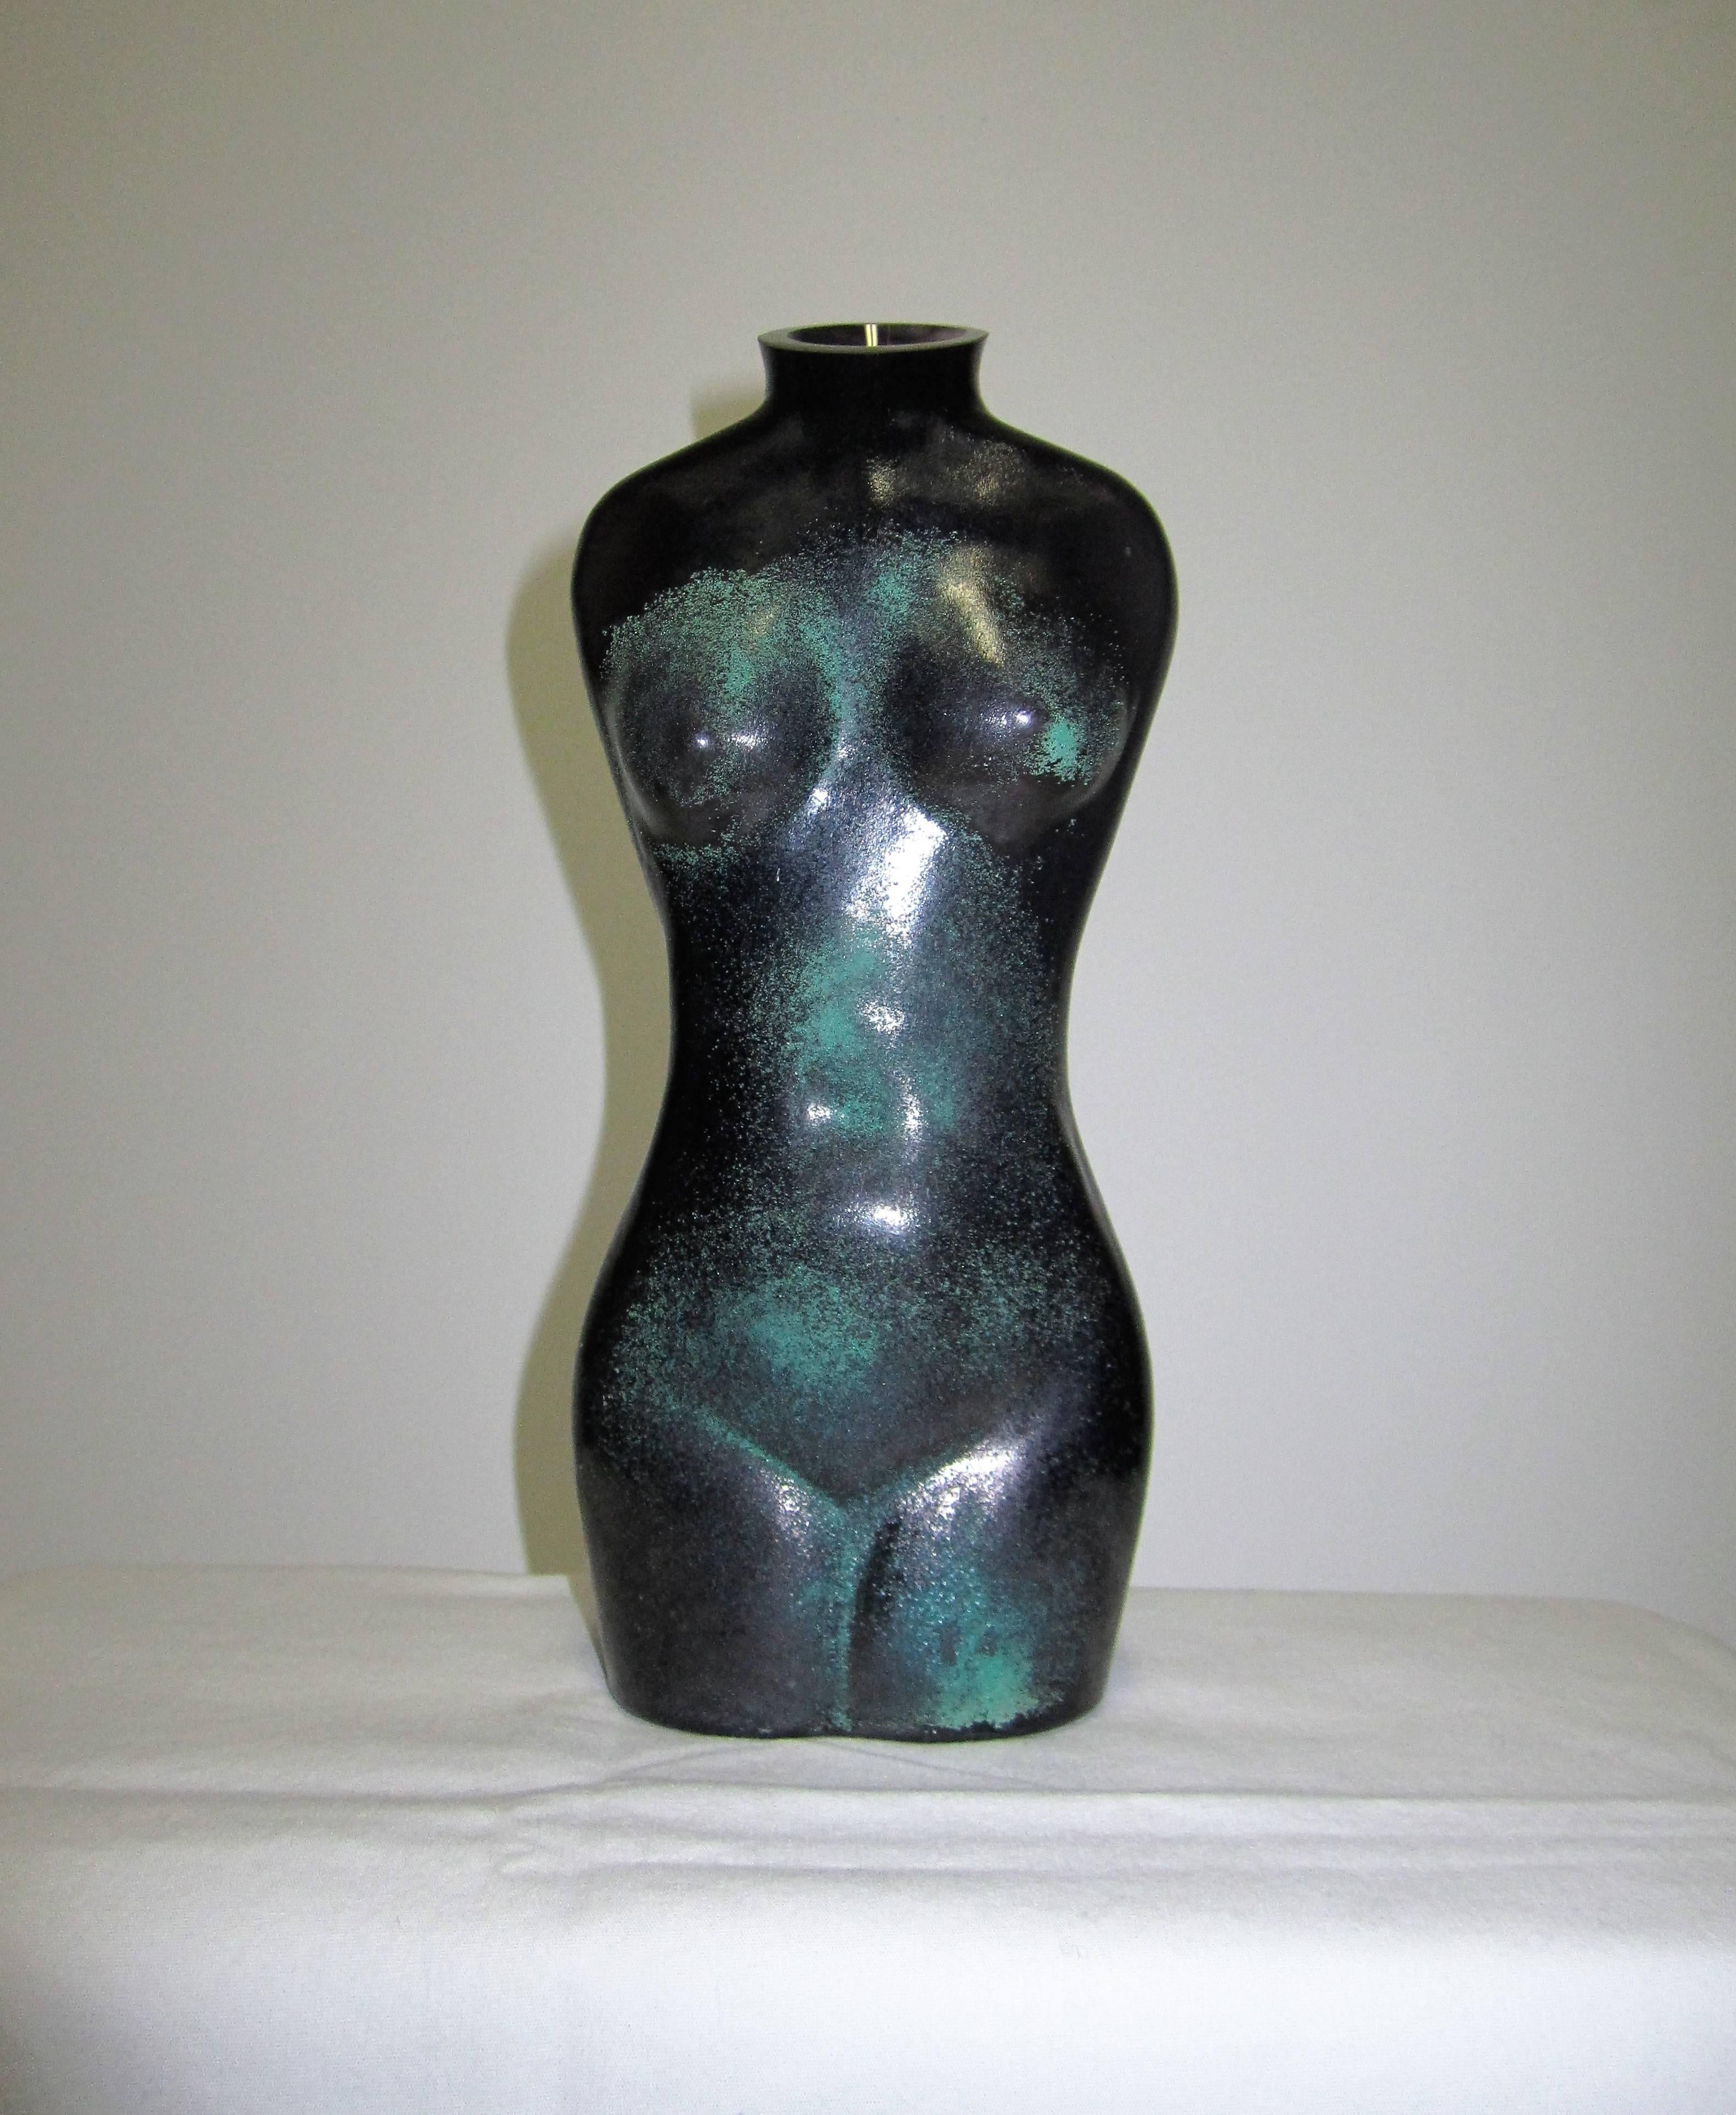 A Scandinavian black glass modernist female nude torso sculpture vessel or vase by Renate Stock for Kosta Boda, with a matte green sand-like texture. Made in Sweden, with maker's mark on bottom. 

Measuring 9 in. H 

Item available here online. By